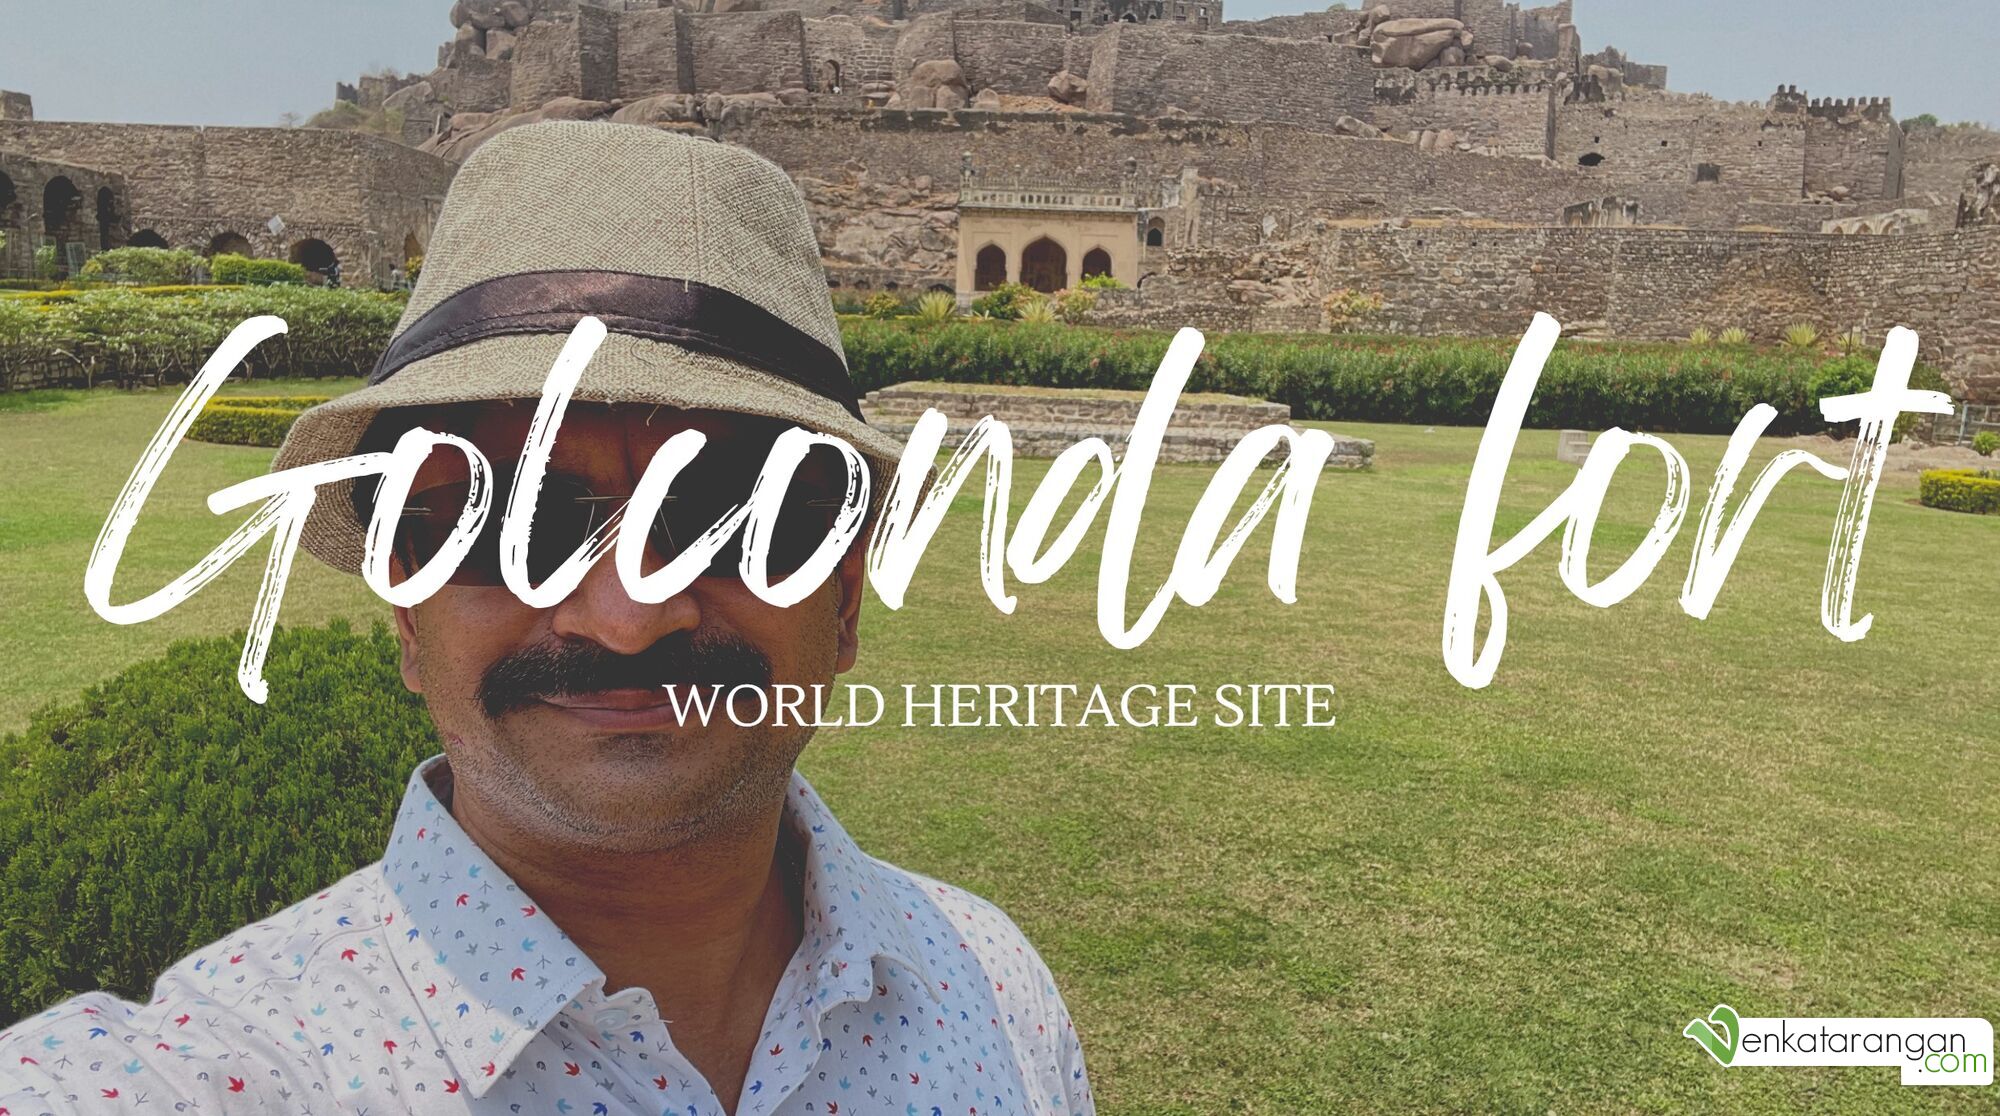 Golconda Fort – Ticket was ₹25 per person (Indian resident)